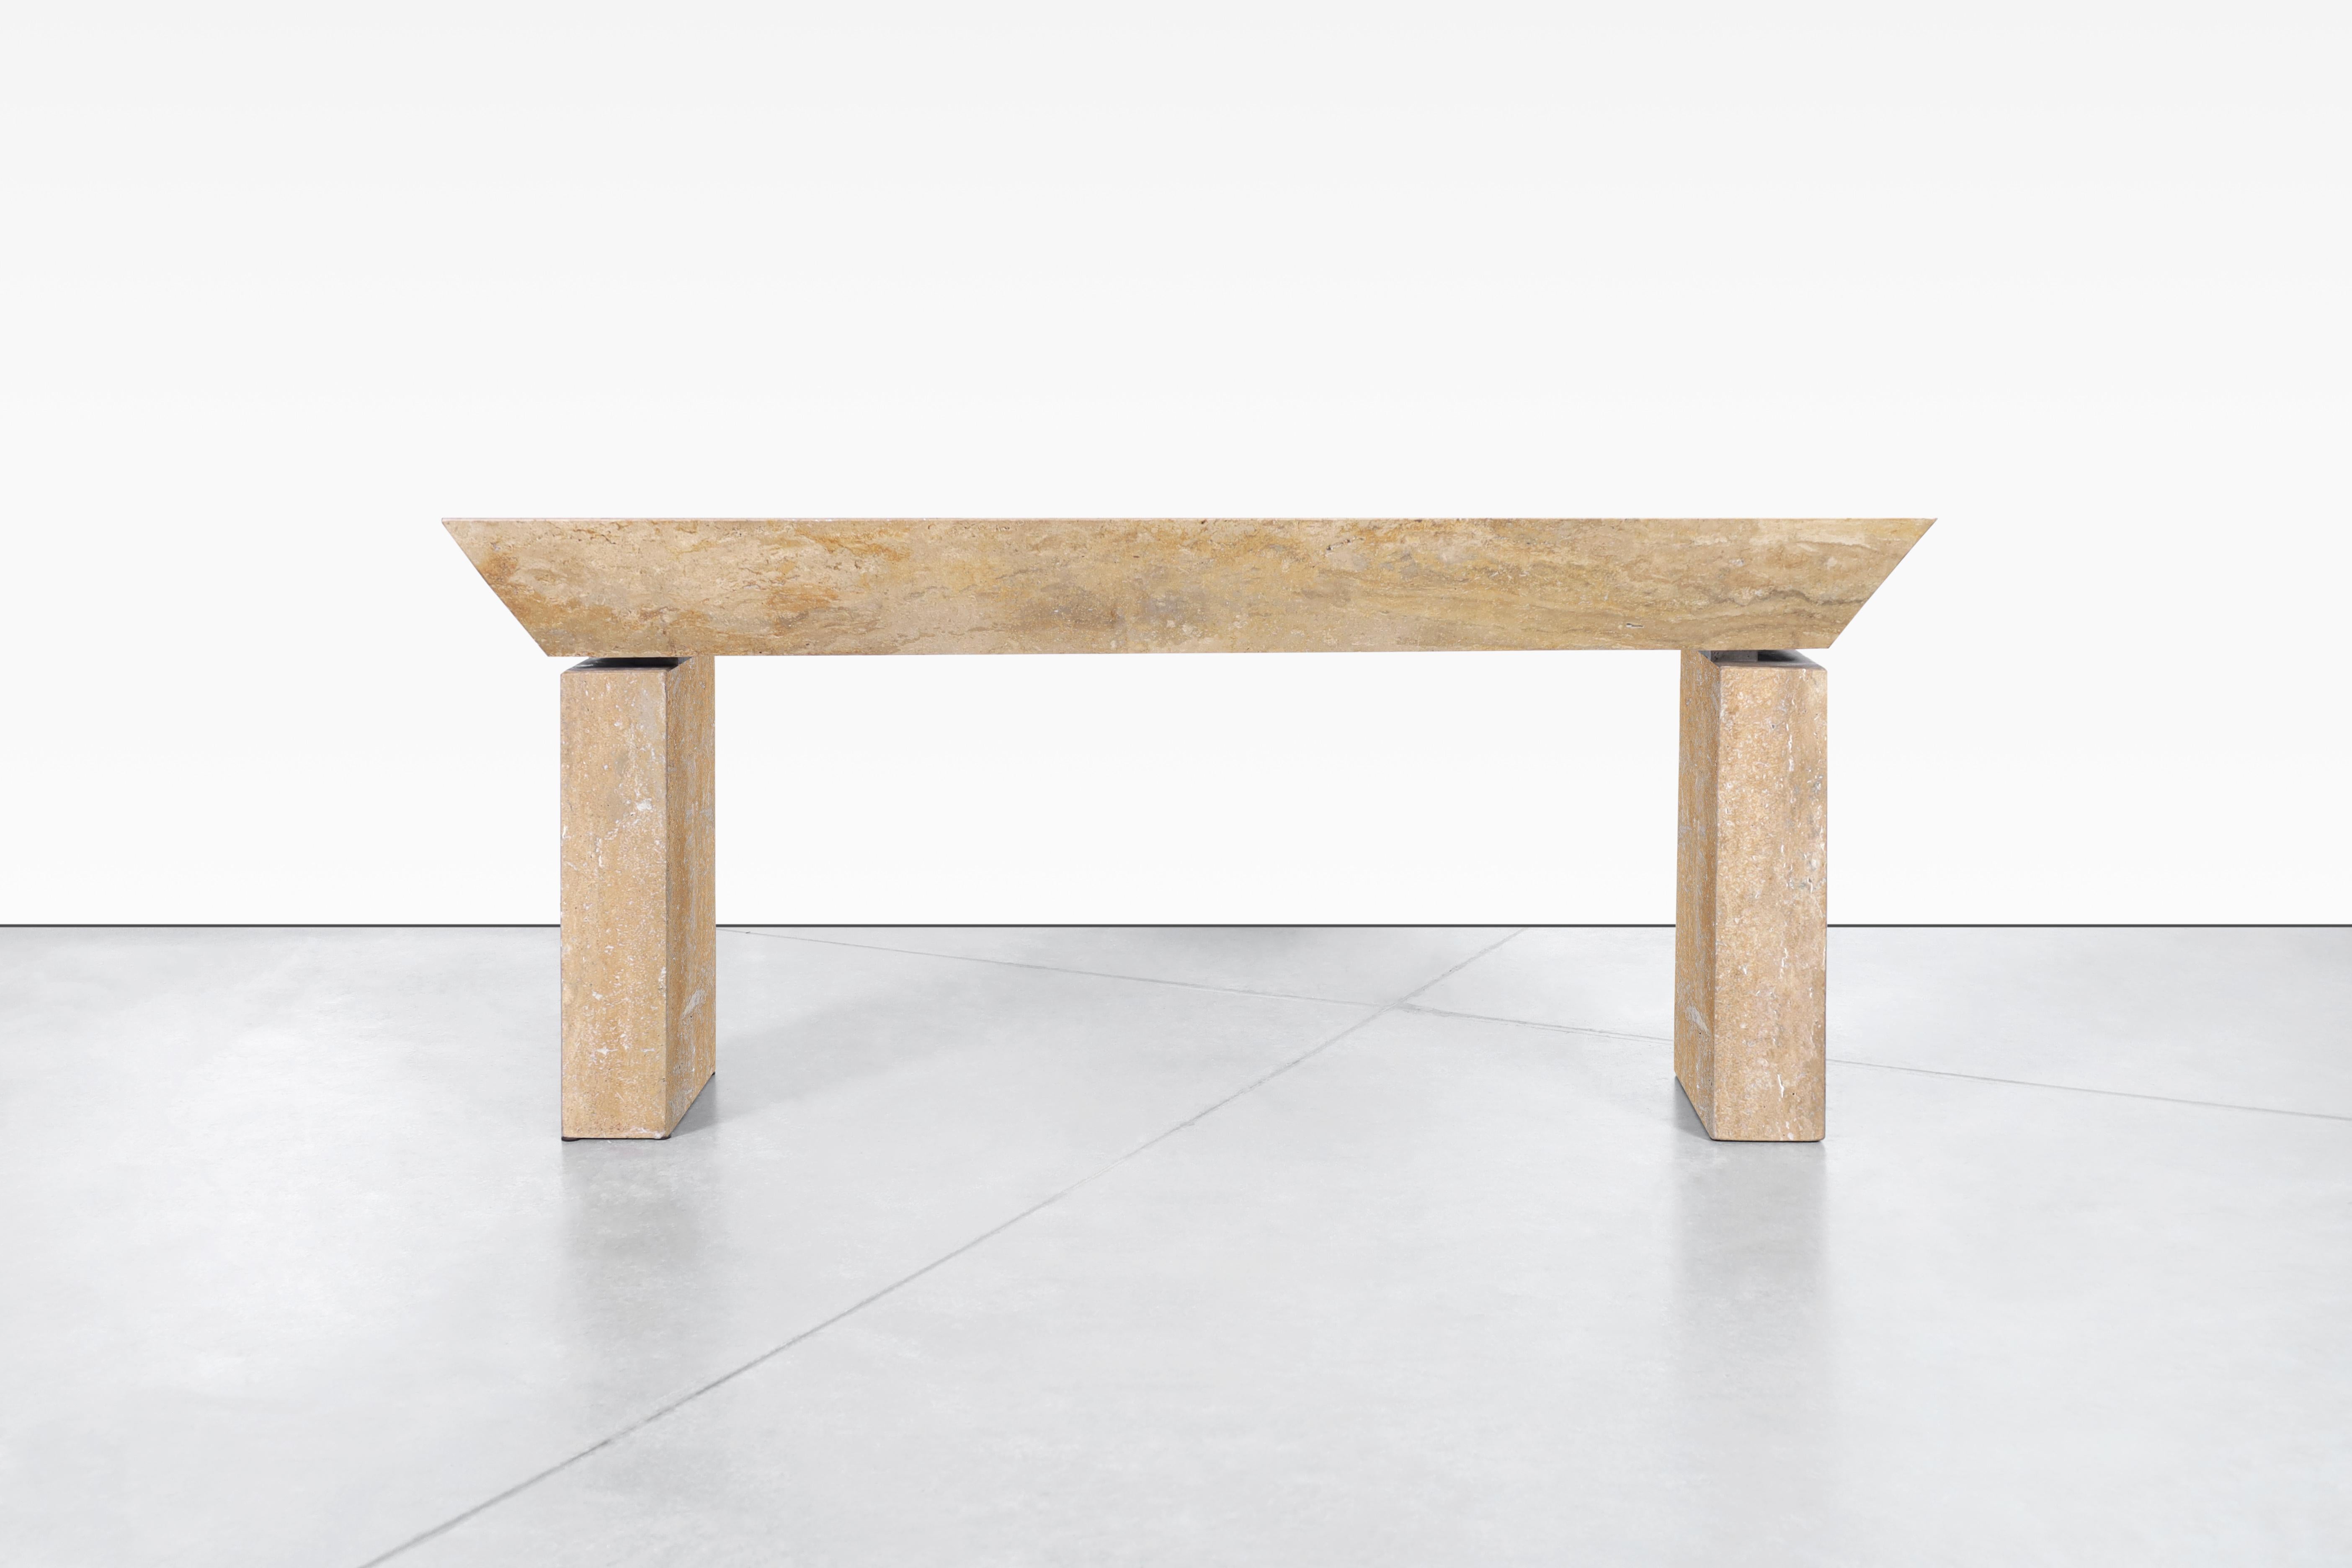 Vintage Italian travertine console table designed in Italy. The modernist design is perfectly complemented by the natural minerals of the travertine stone. The table features a rectangular travertine top with an angular cut around the entire edge